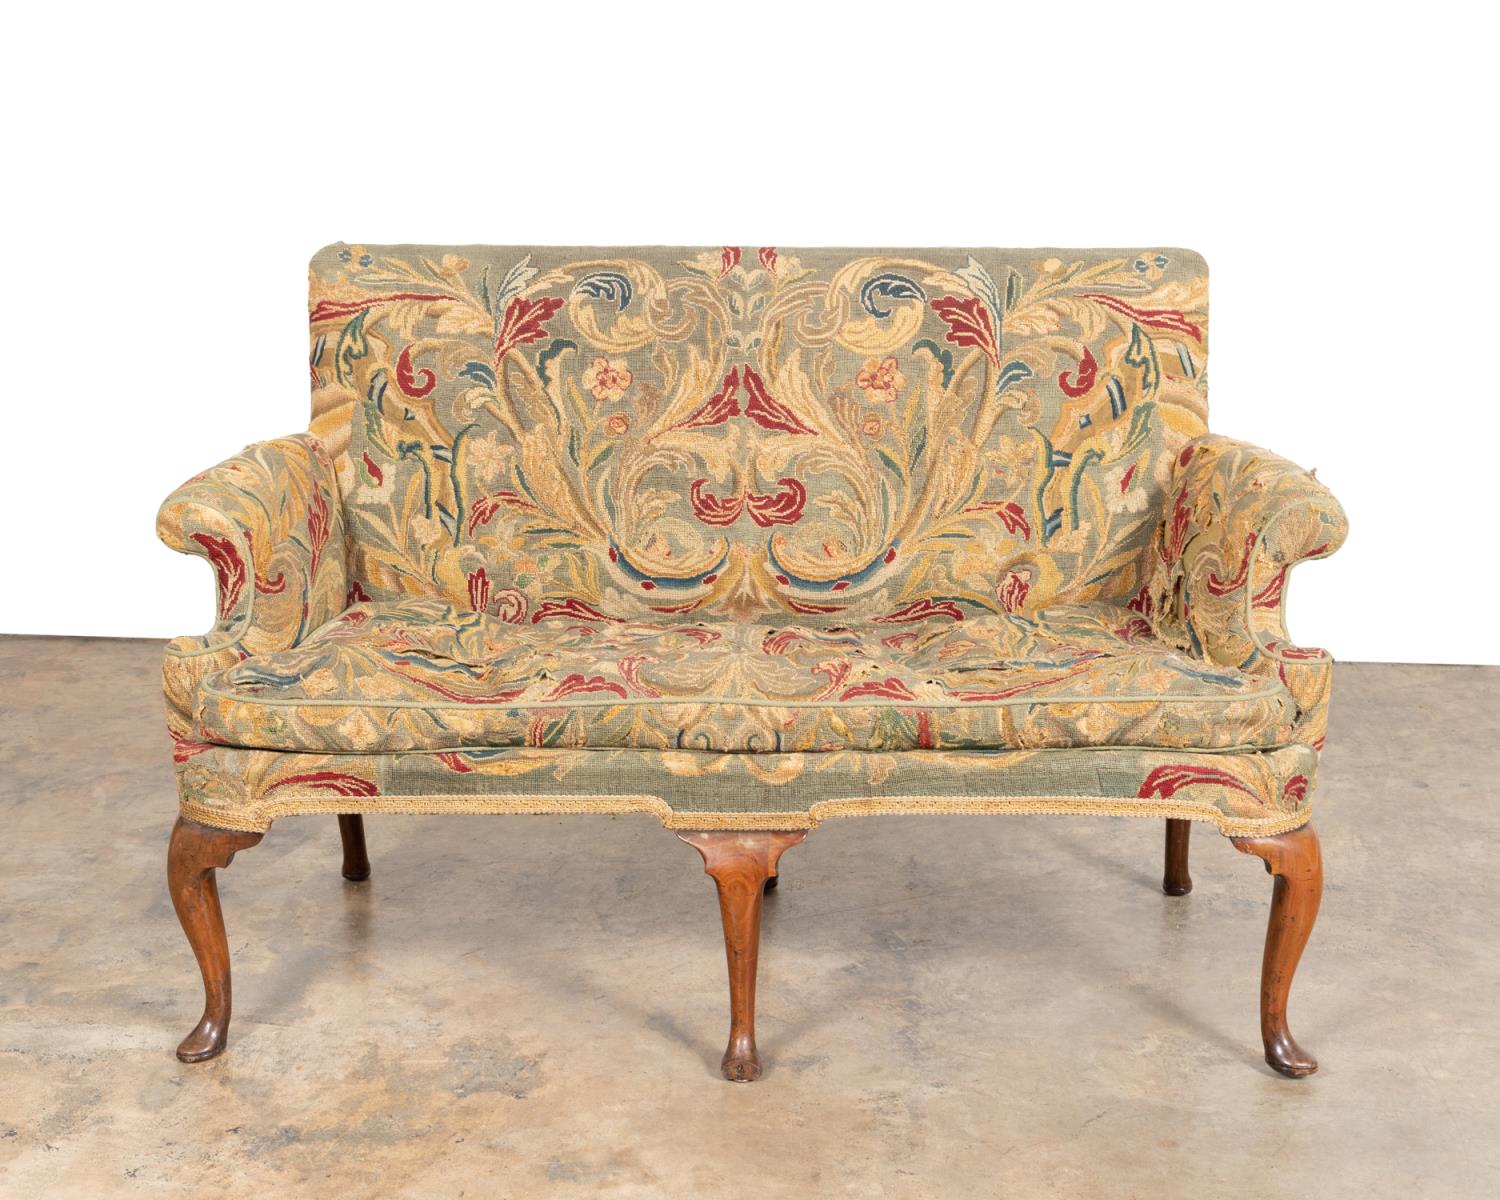  18TH C QUEEN ANNE MAHOGANY TAPESTRY 2bfdf7